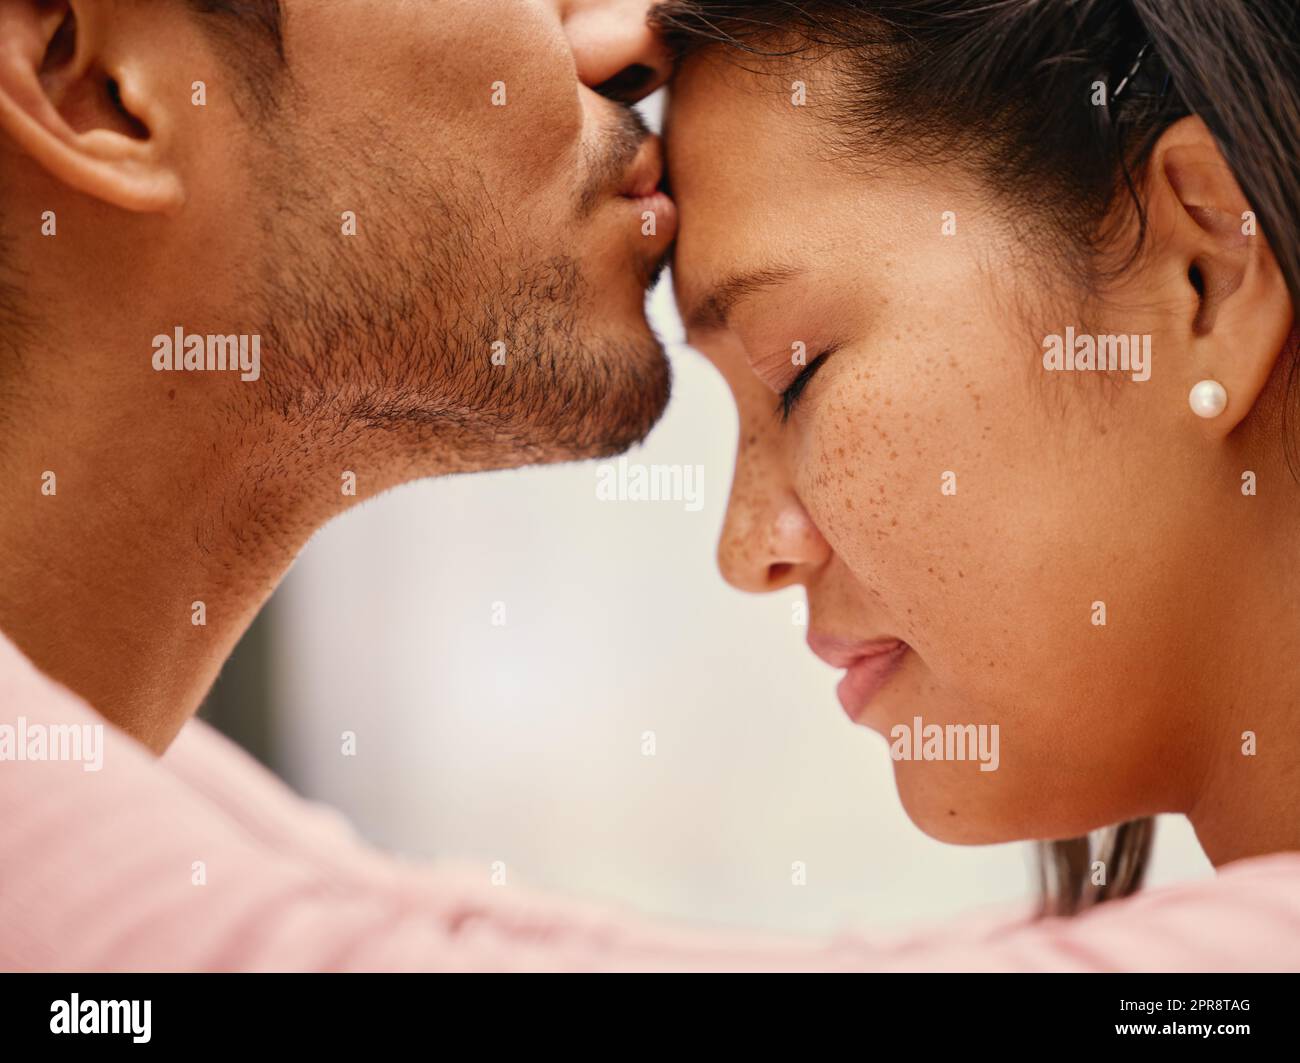 Closeup of mixed race man kissing his girlfriends forehead. Headshot of hispanic couple bonding and sharing an intimate moment at home. Beautiful woman with freckles feeling in love with boyfriend Stock Photo